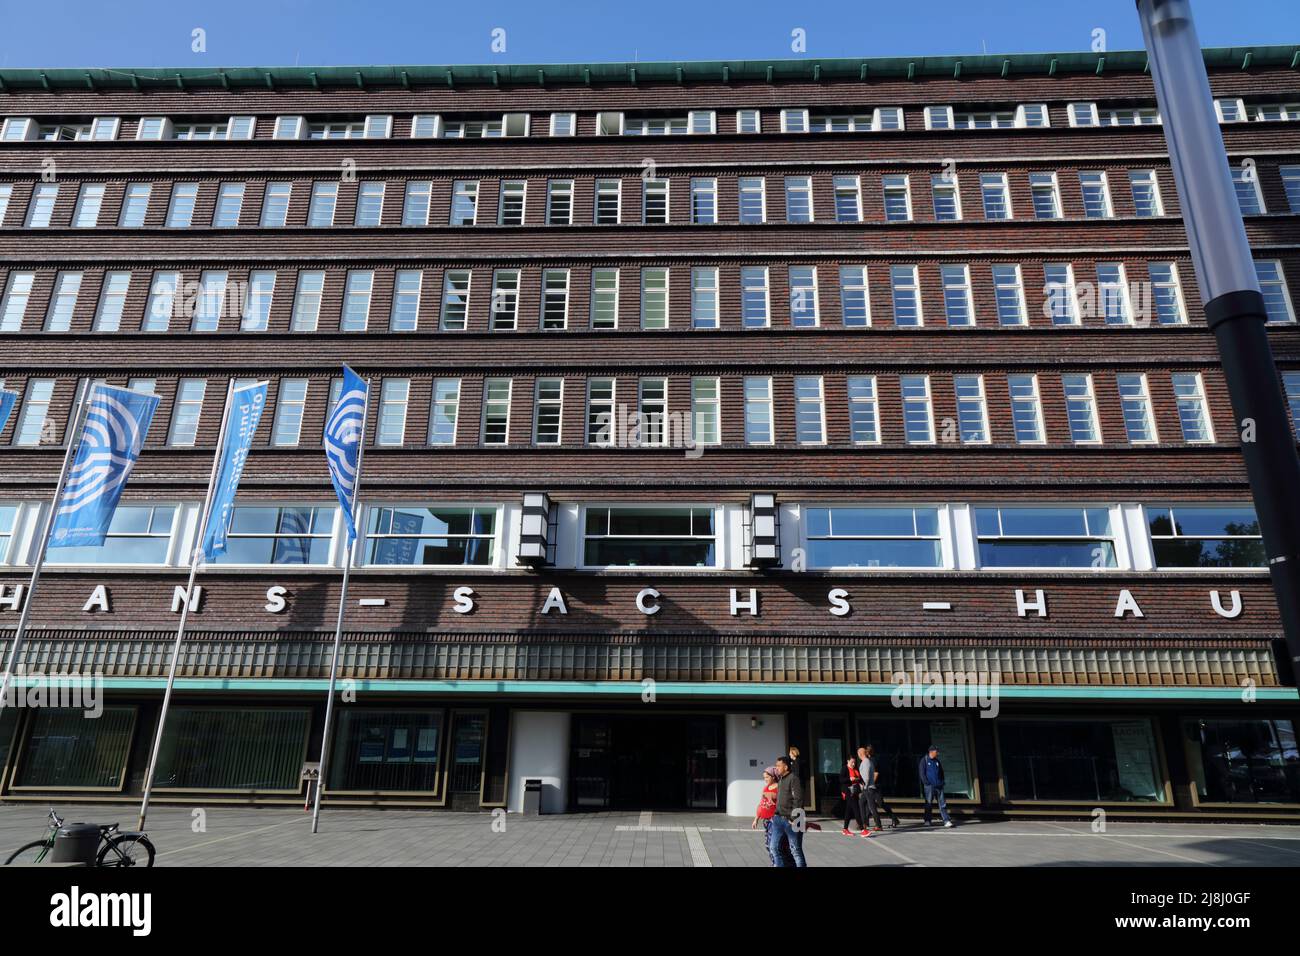 GELSENKIRCHEN, GERMANY - SEPTEMBER 17, 2020: Hans Sachs Haus building in Gelsenkirchen, Germany. Originally planned to be multifunctional, it soon bec Stock Photo